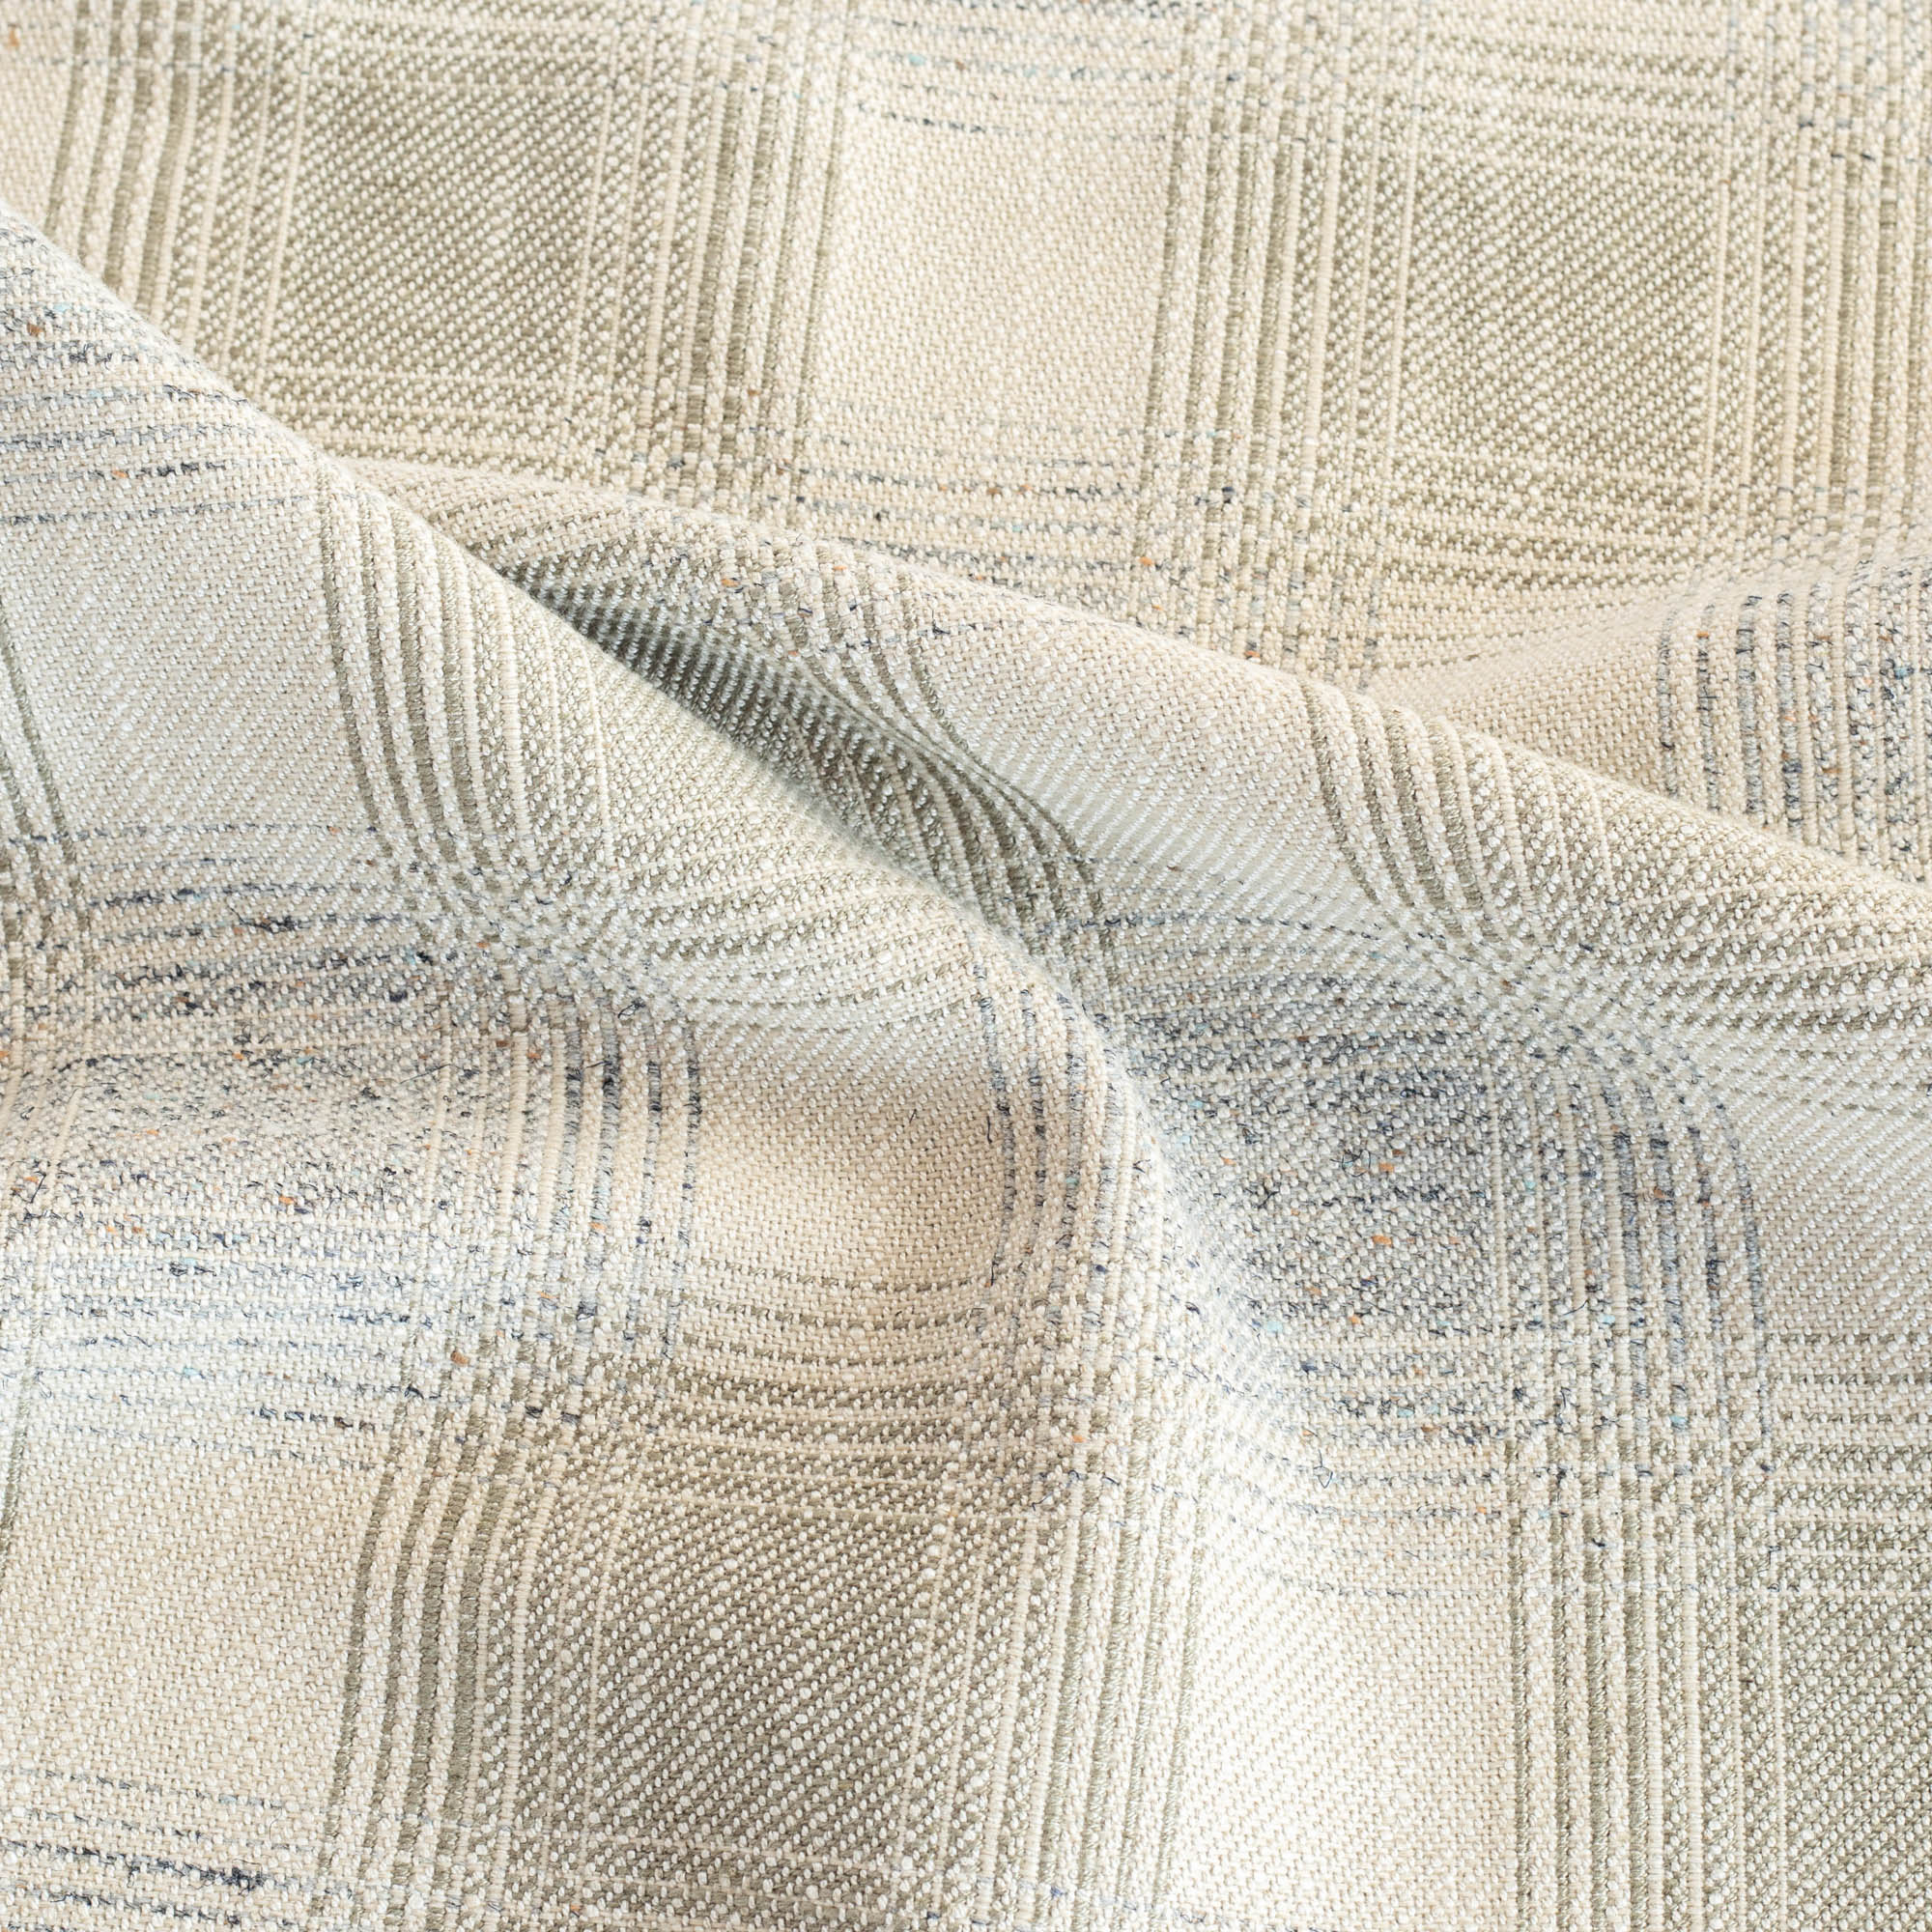 Cove Seaside Fabric, a light grey and denim blue plaid upholstery fabric from Tonic Living